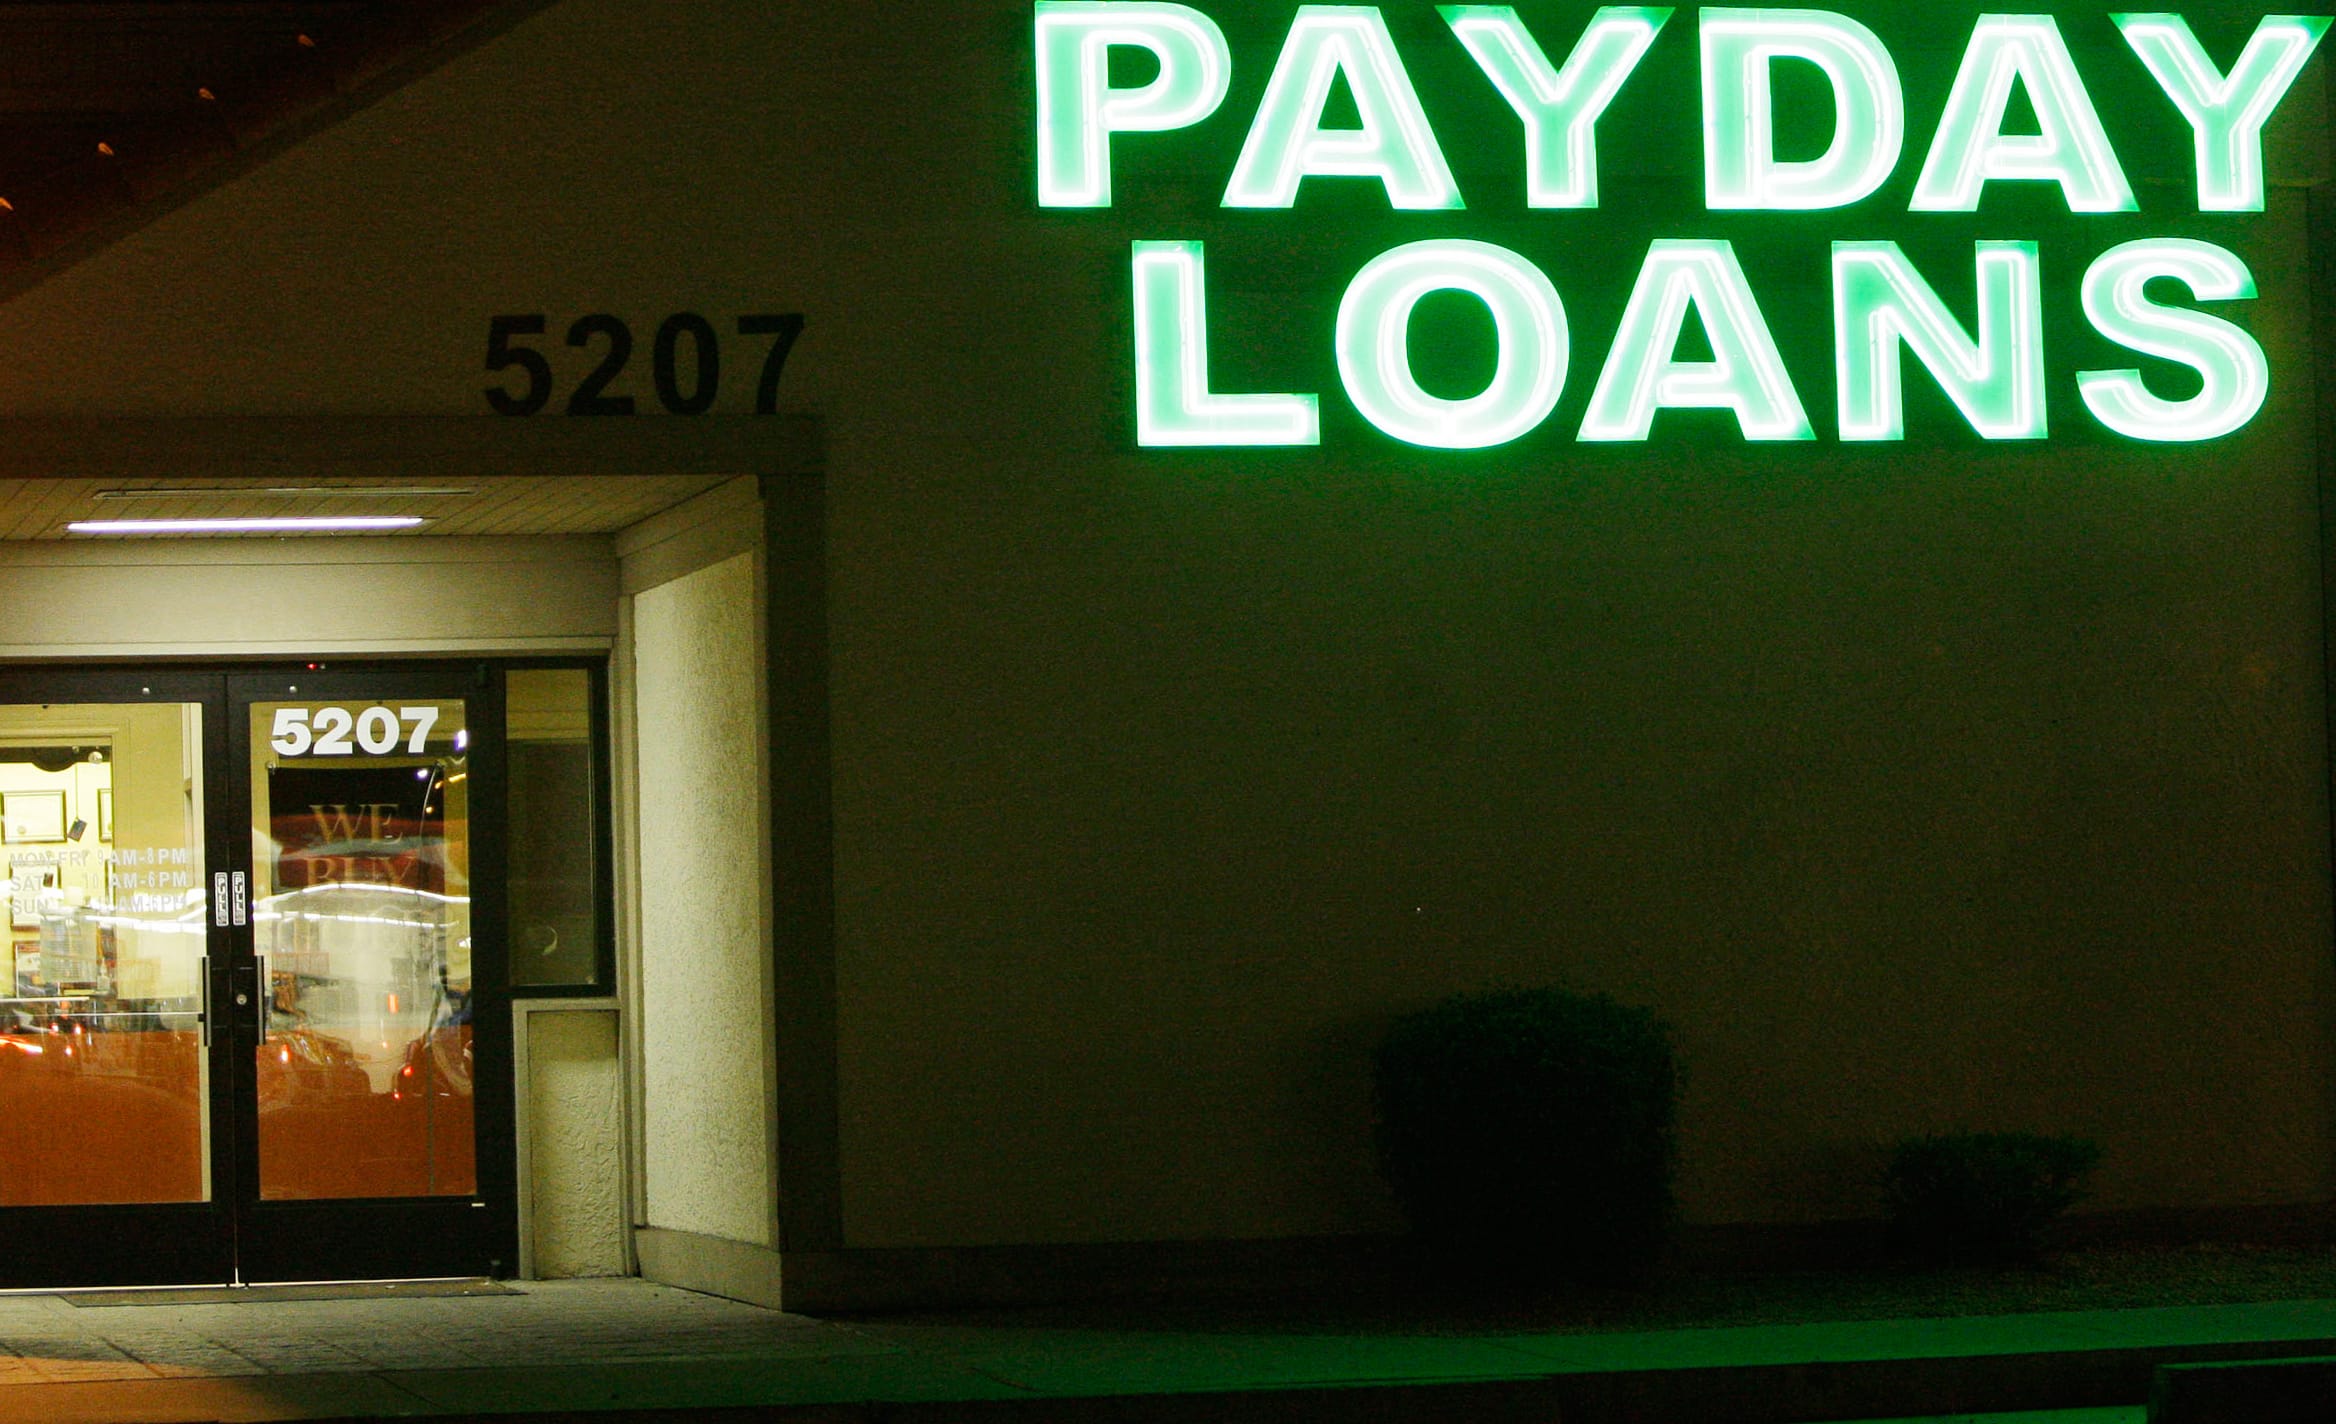 Payday loans trap consumers in “debt cobwebs”